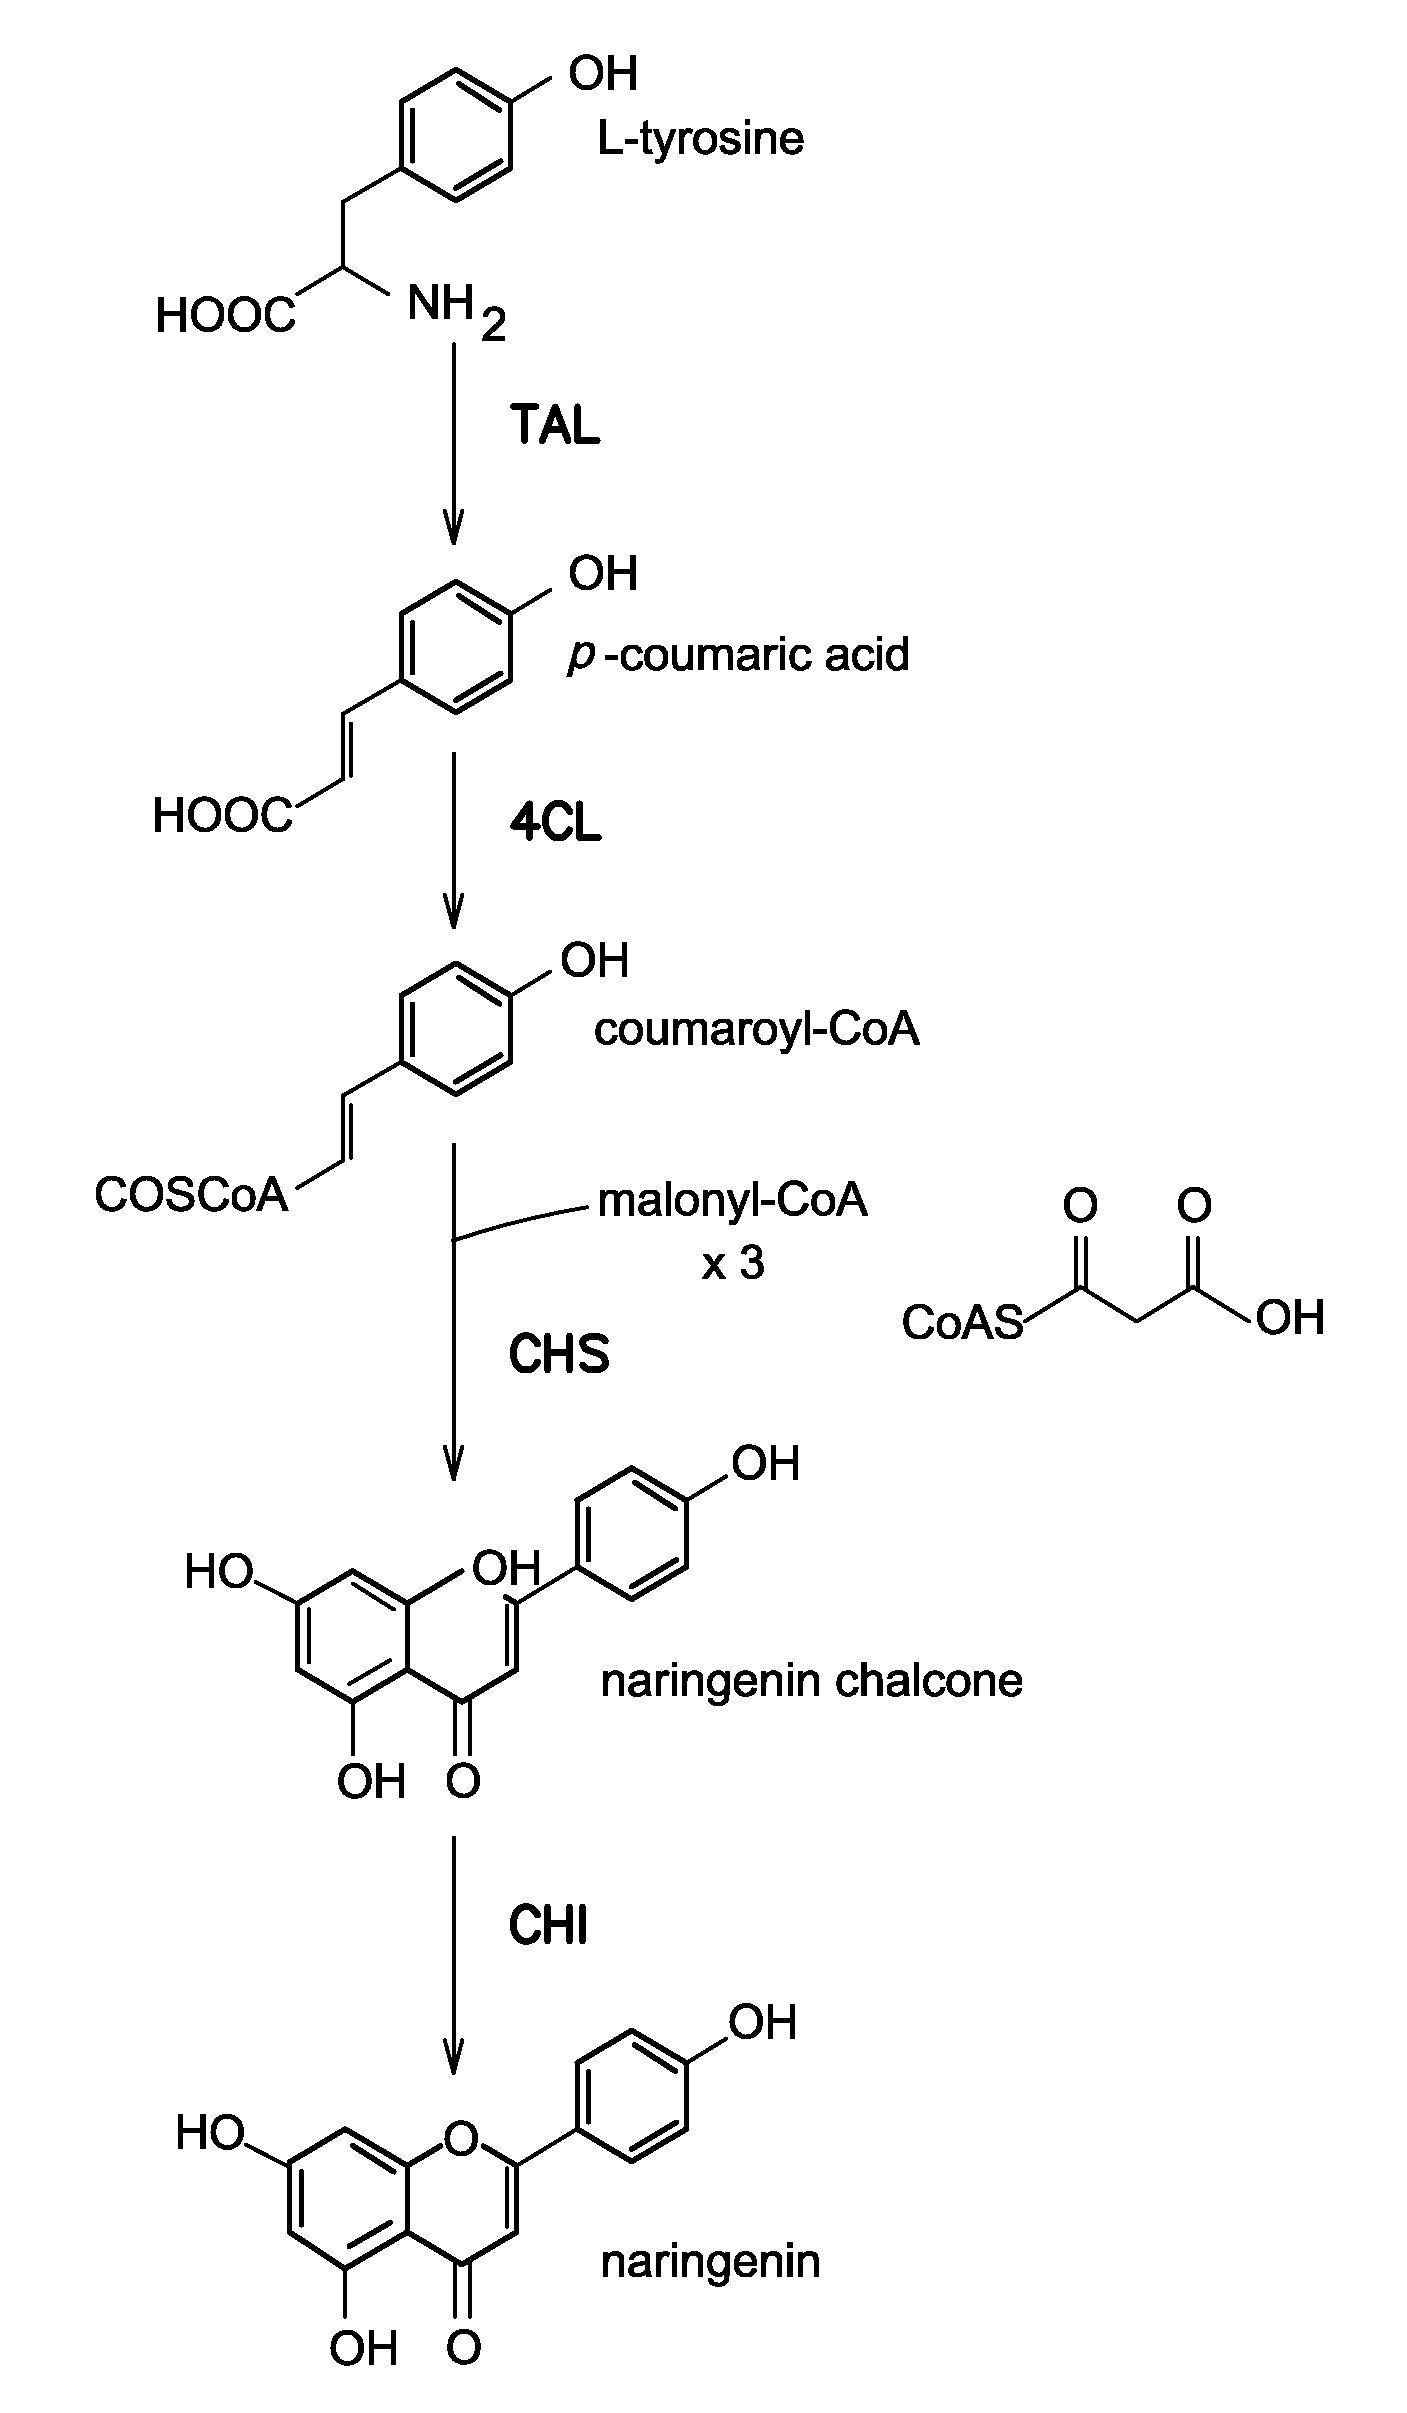 Strains for the production of flavonoids from glucose